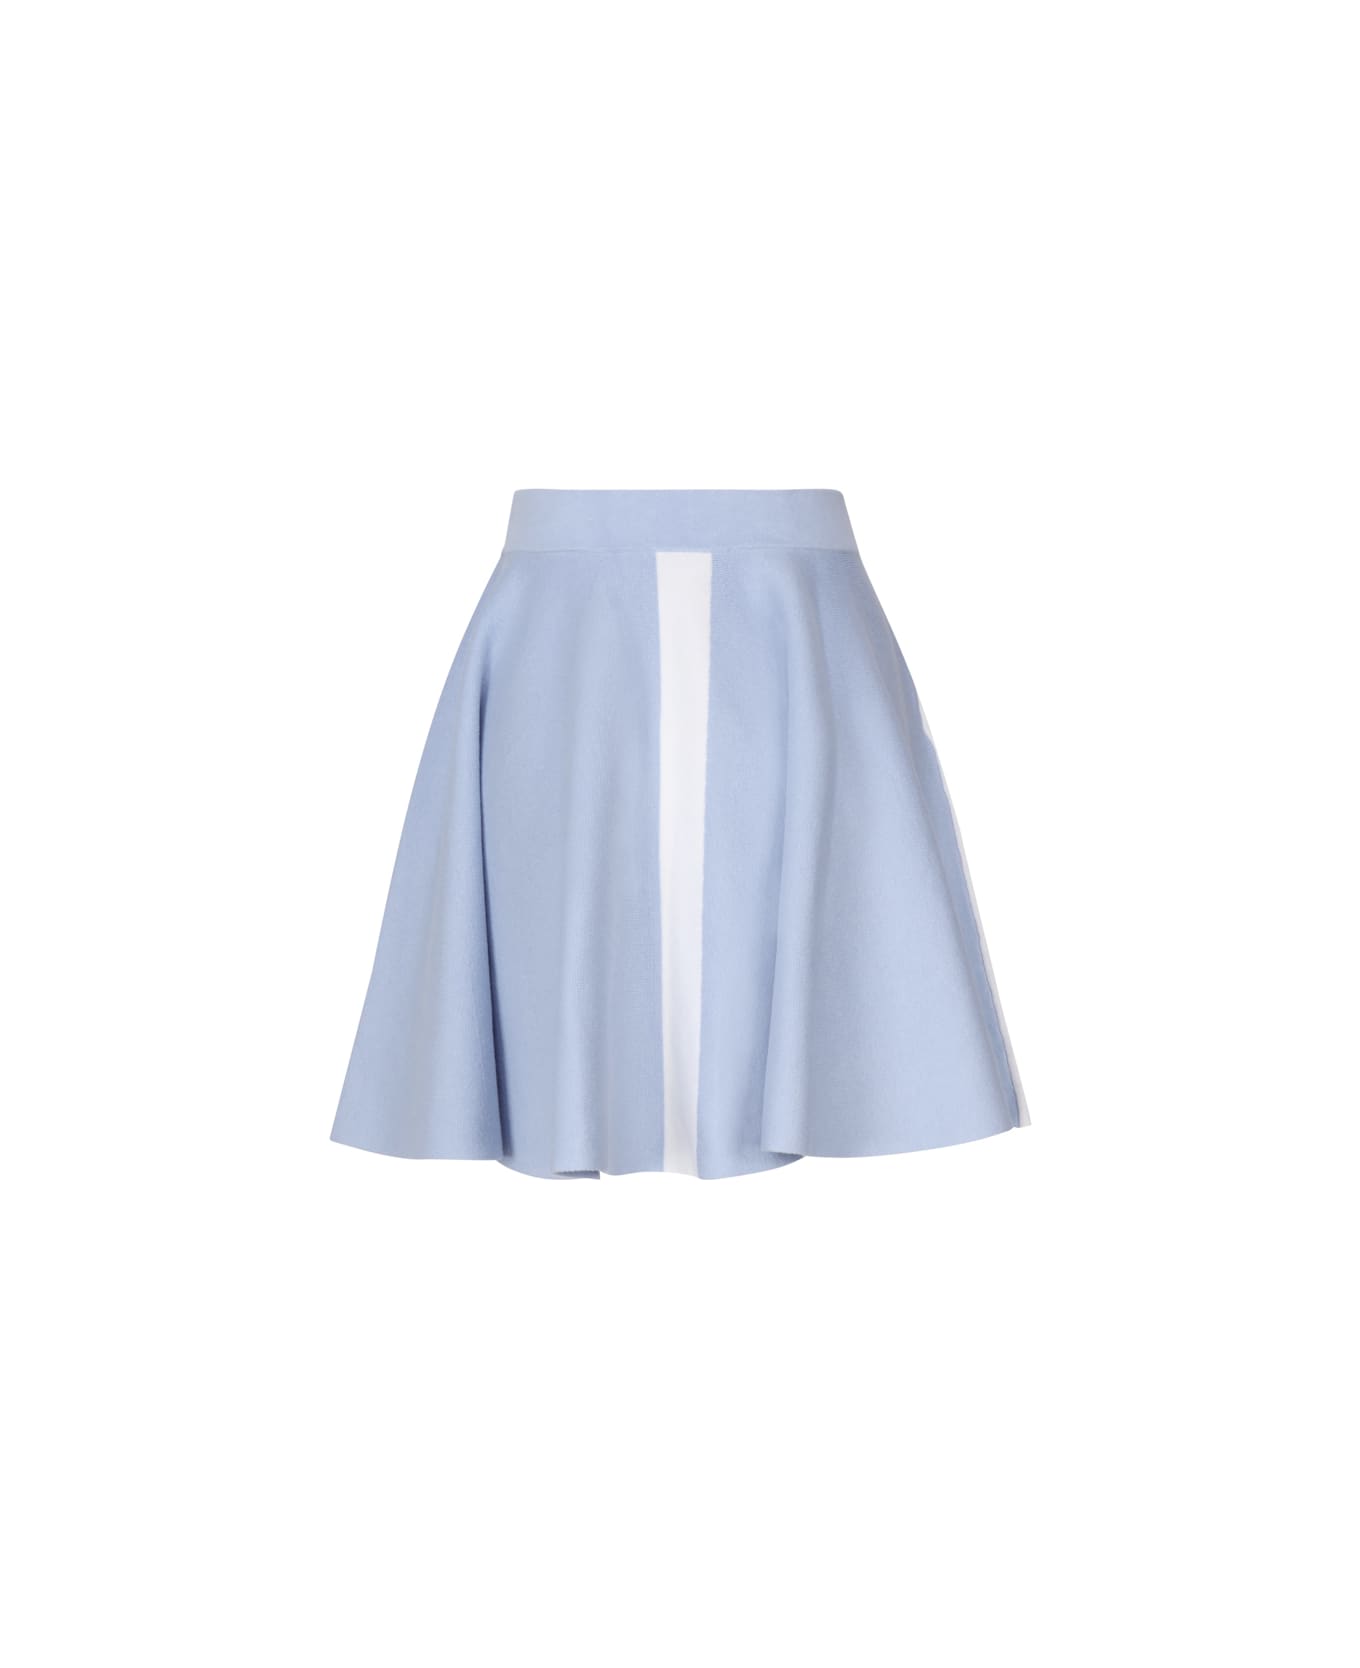 J.W. Anderson Flared Mini Skirt With Embroidery - Light blue, white